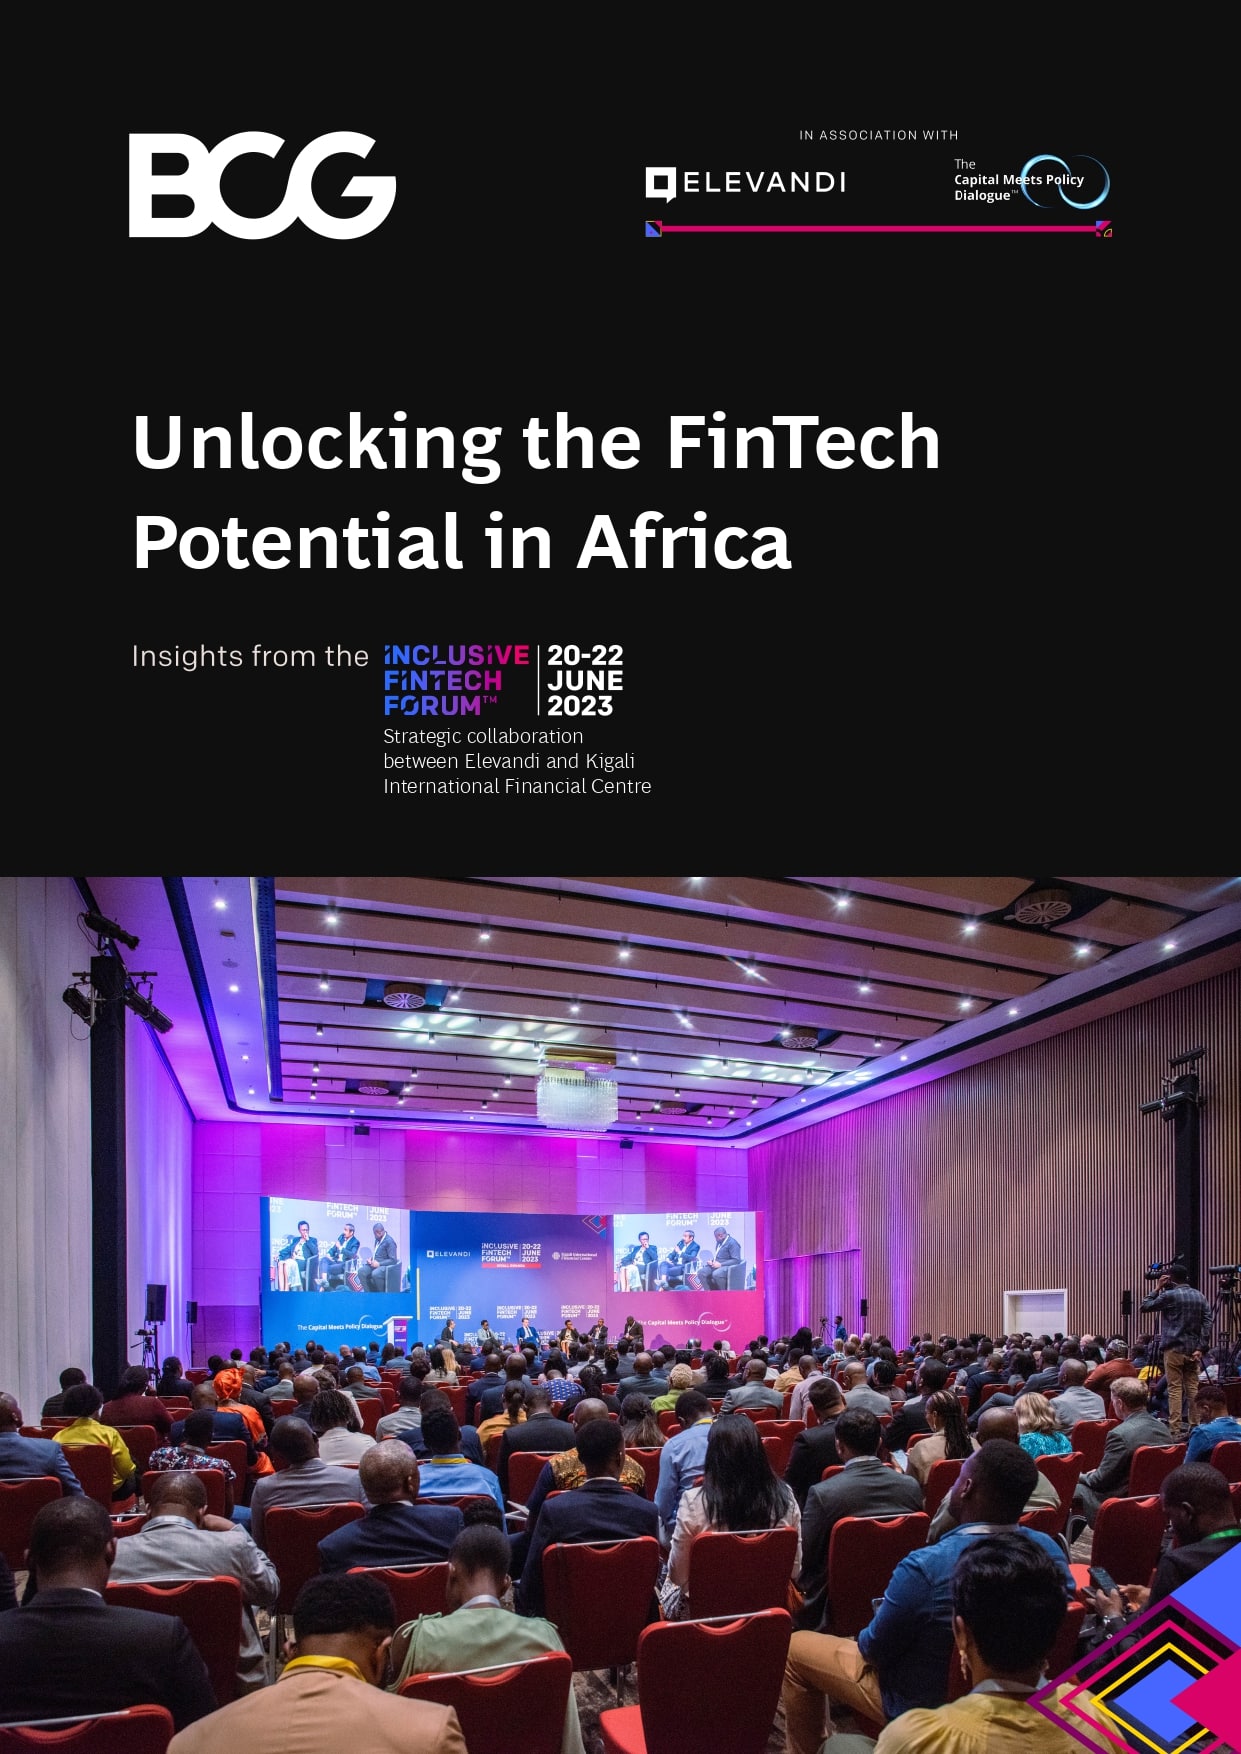 19th Sept Unlocking the Fintech Potential in Africa